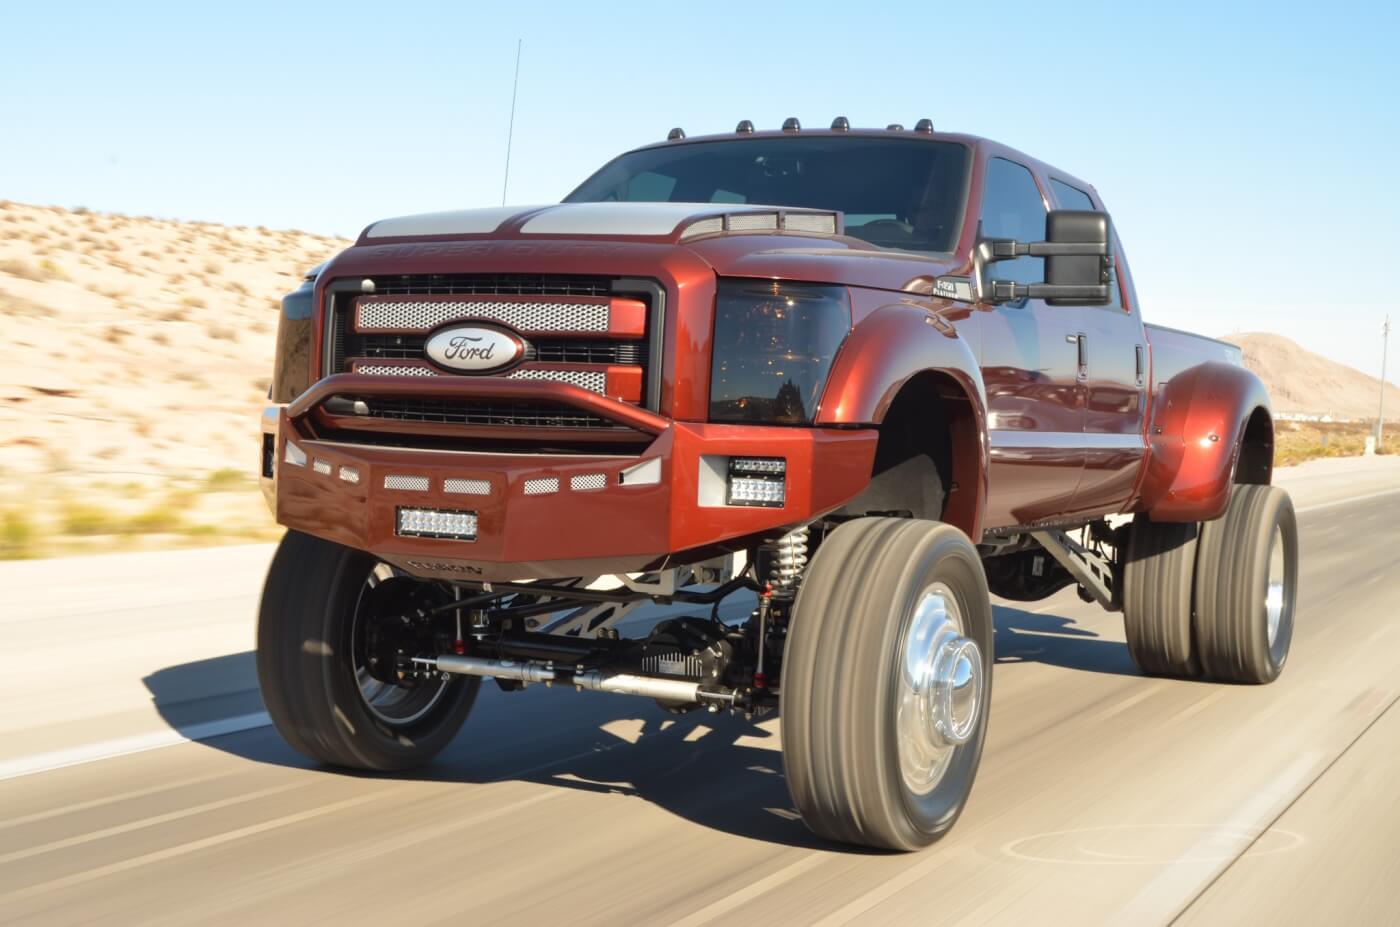 This F450 makes all the factory built rigs look like plain Jane rigs in comparison.